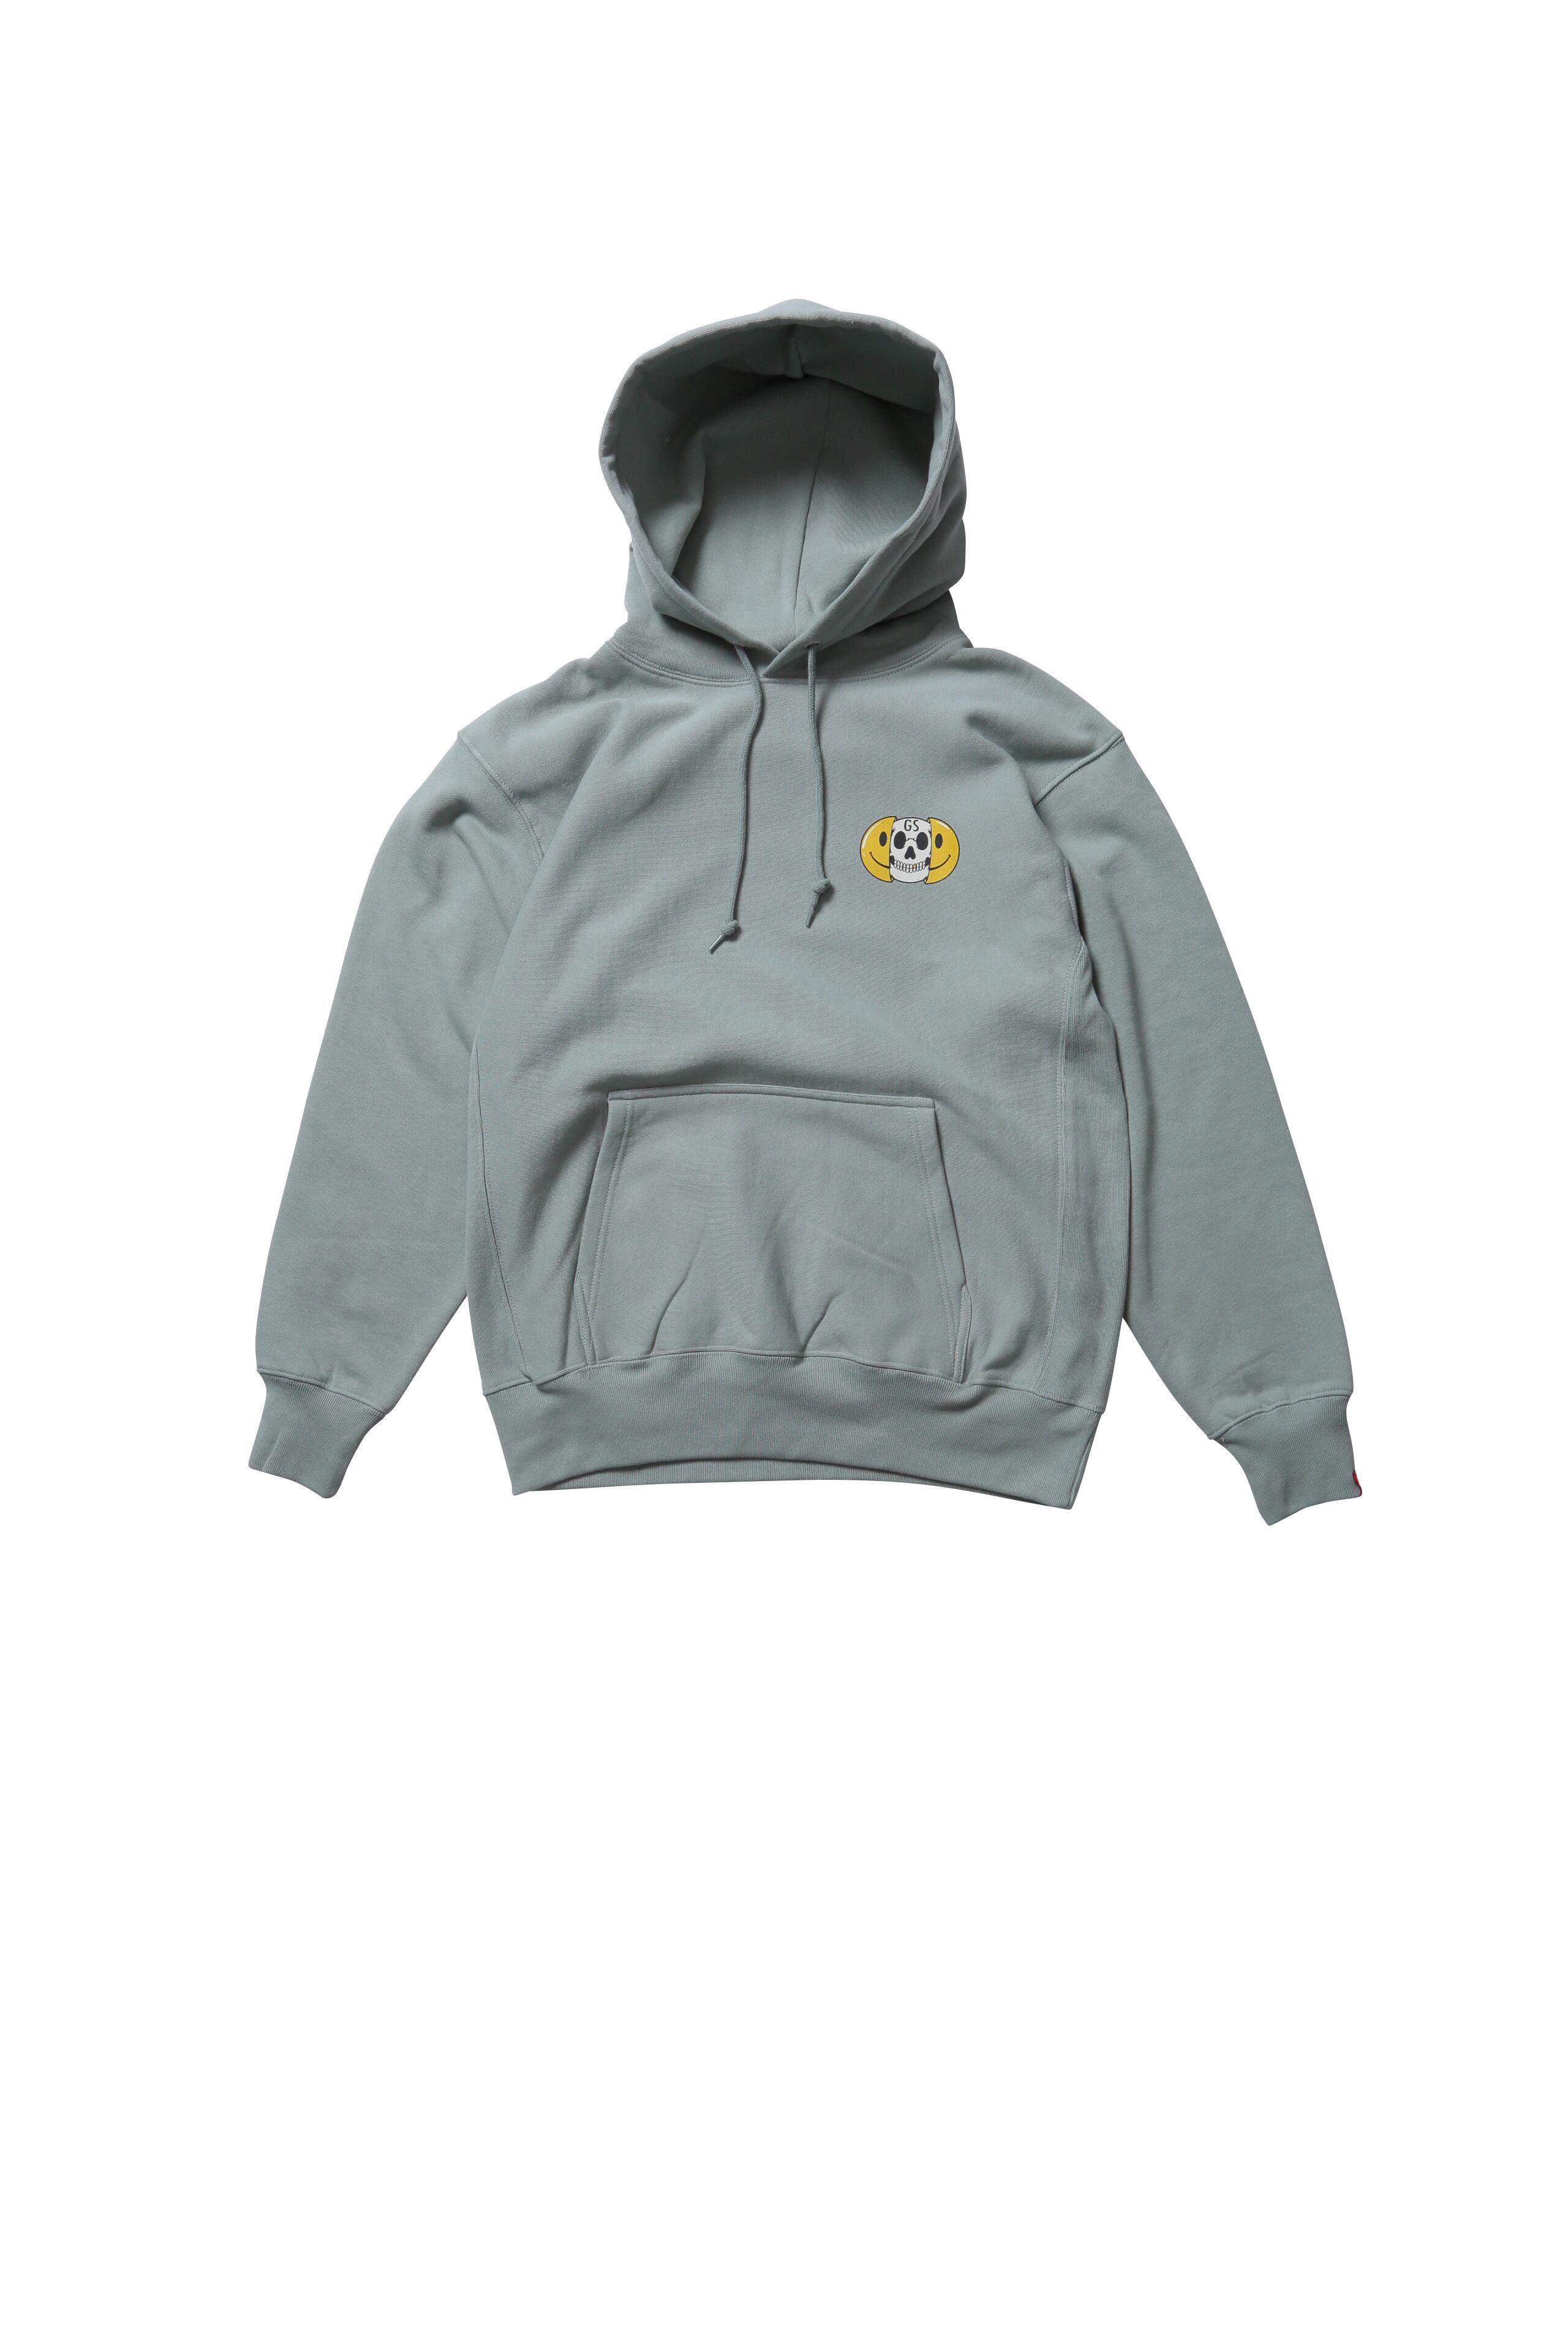 CHILL HOODY / GS22-ASW05